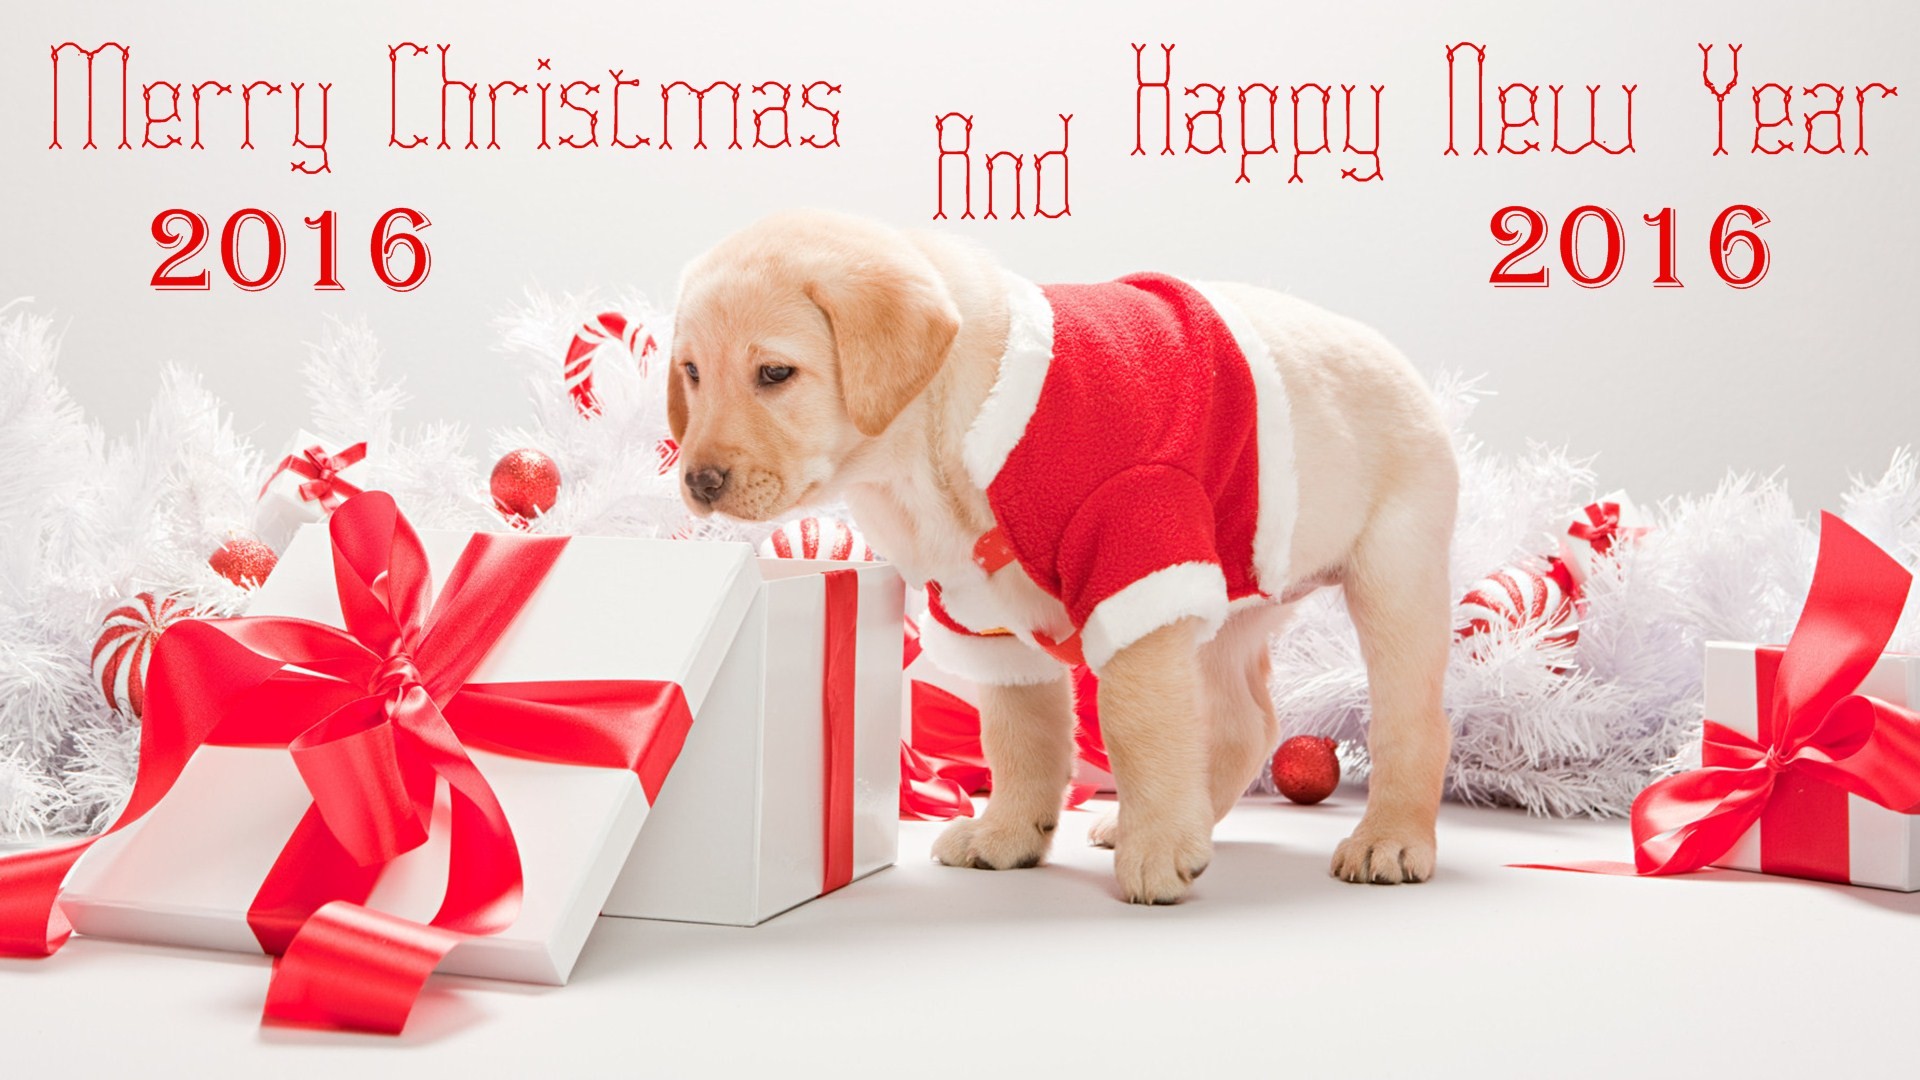 Merry Christmas wallpaper Cute Puppy with a christmas and new year message